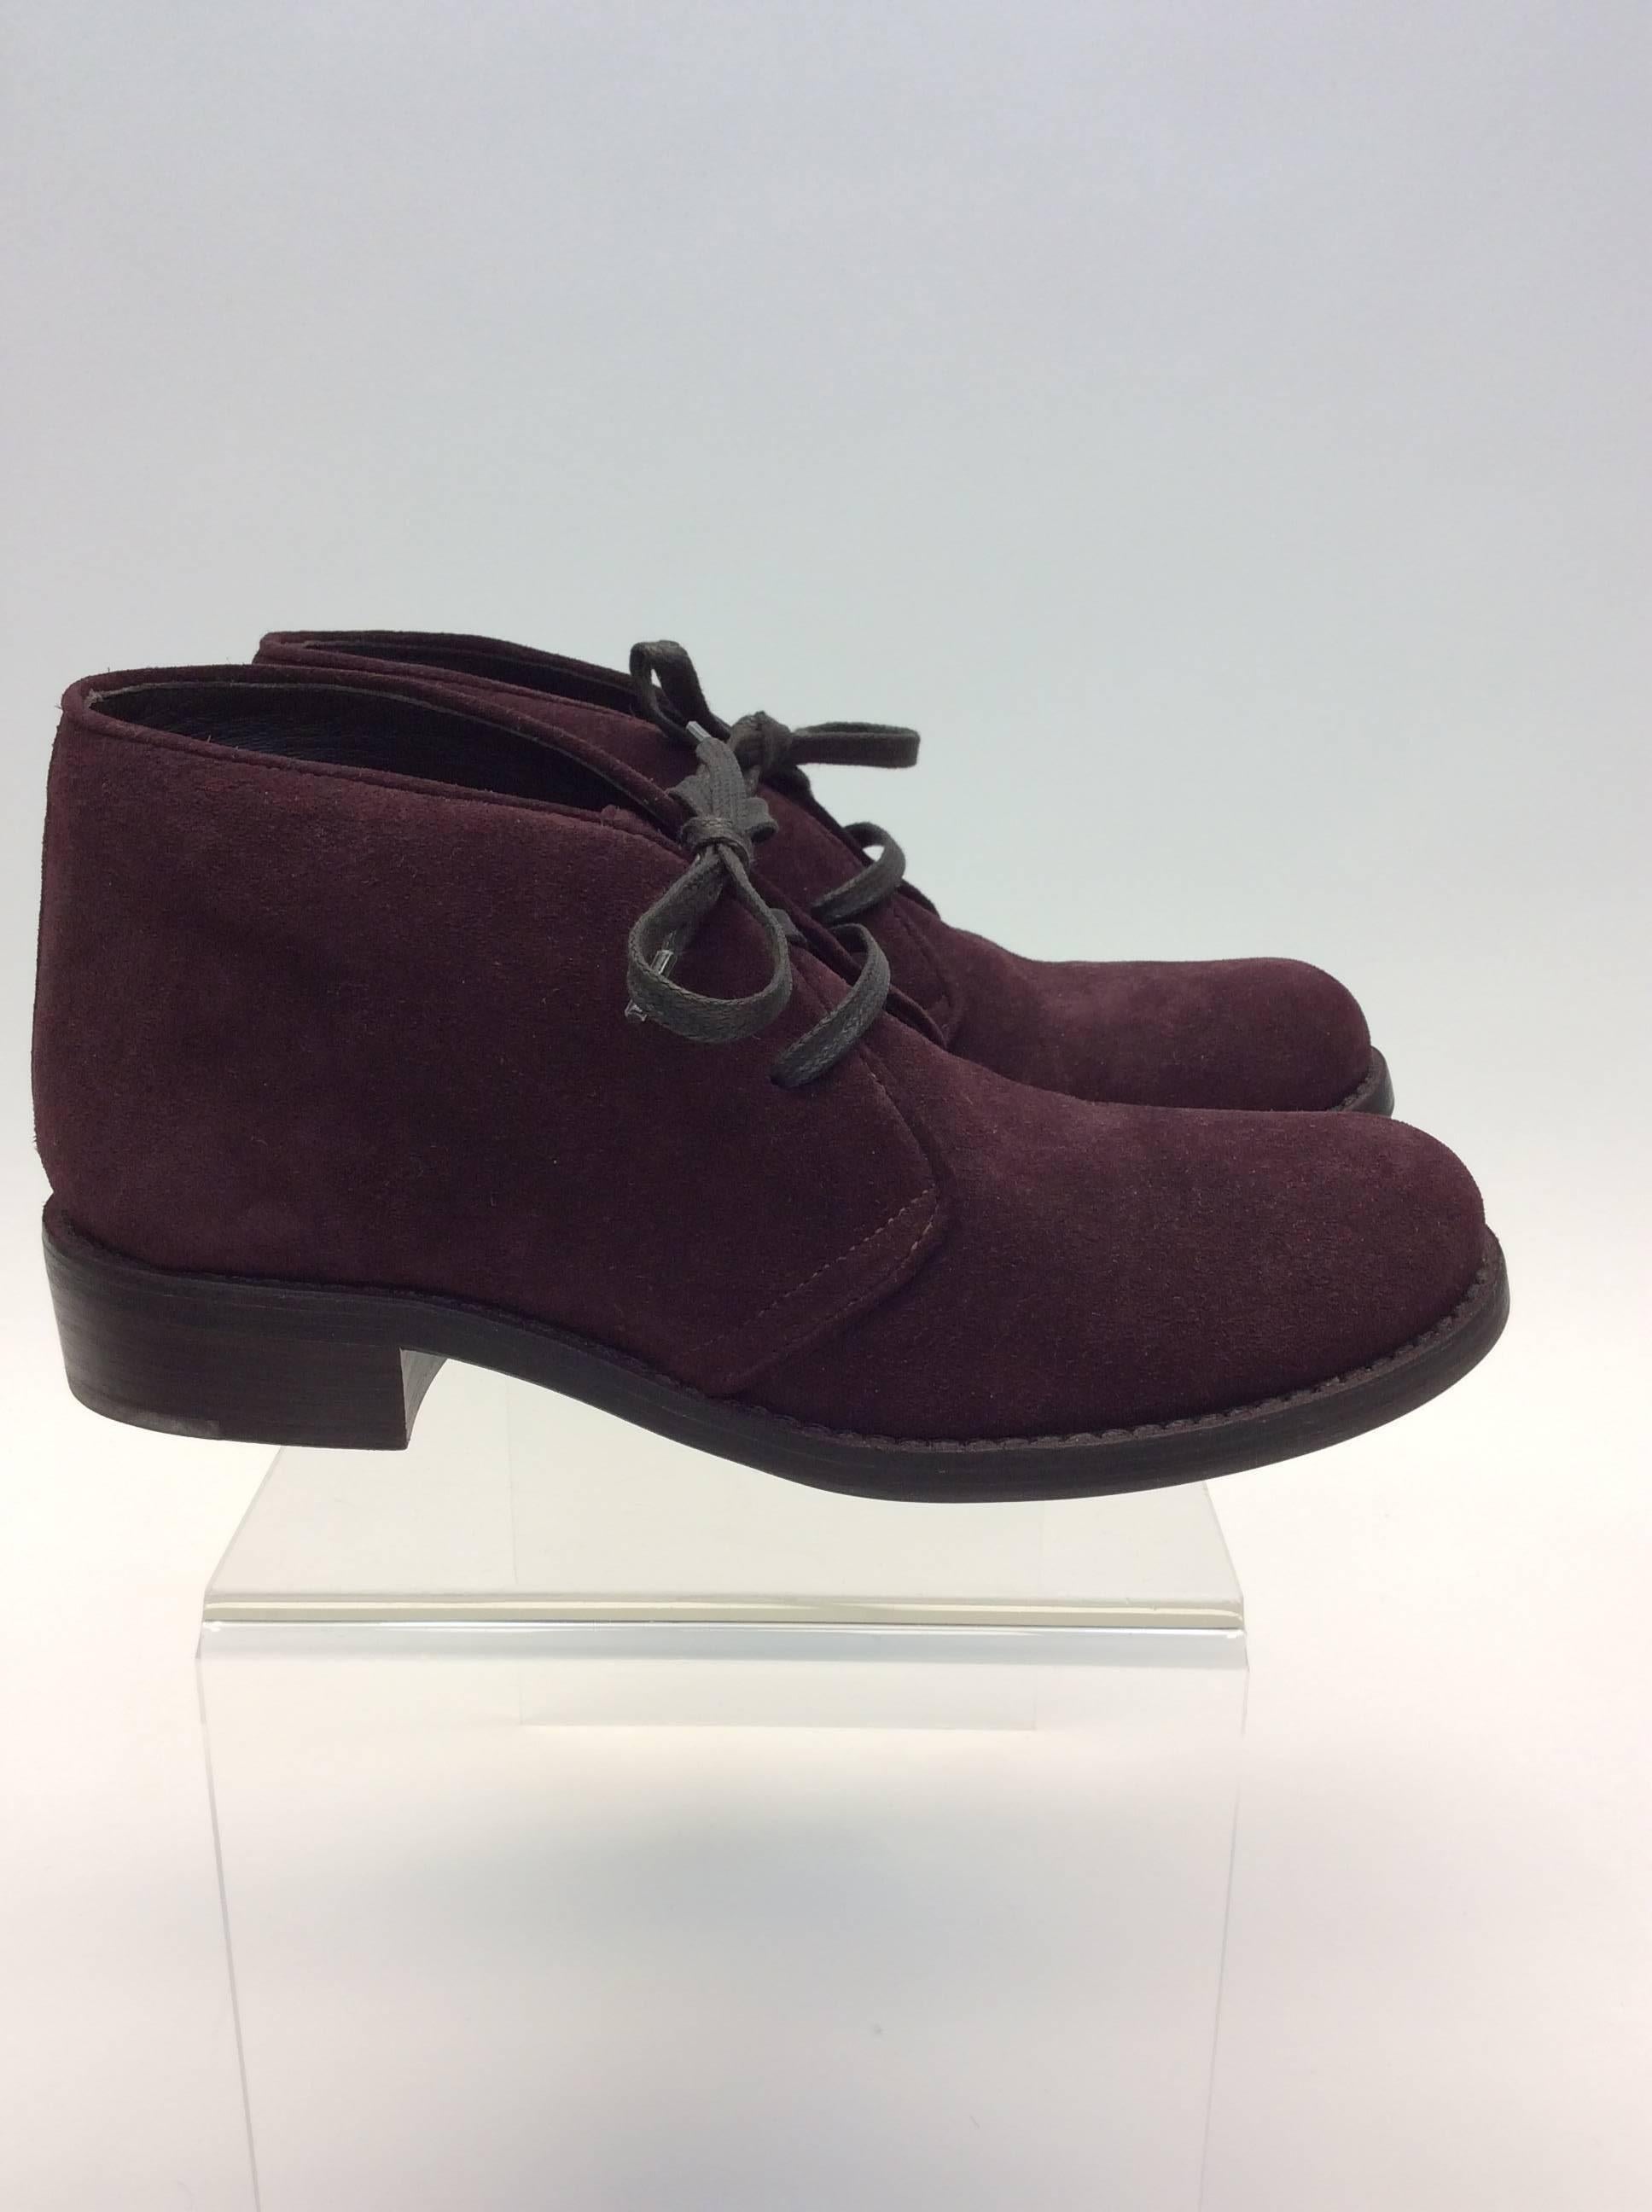 Bottega Veneta Maroon Suede Oxford Shoes
Never been worn
Comes with box
Suede
Maroon
Size 36